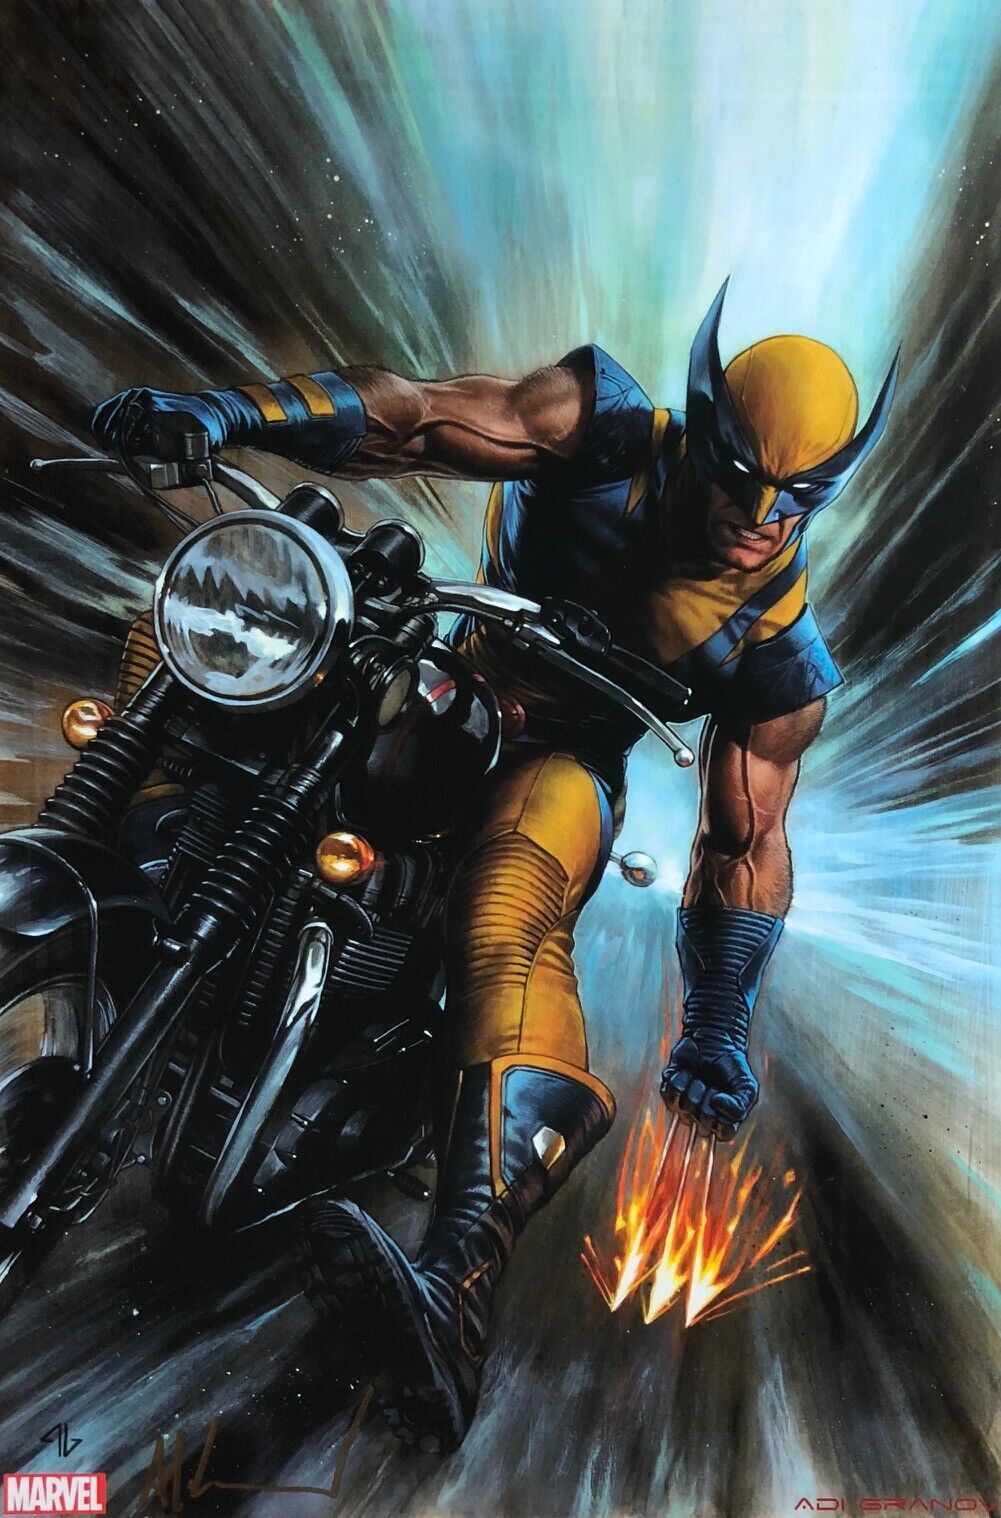 ADI GRANOV rare WOLVERINE print A3 SIGNED variant cover ART limited LAST TWO